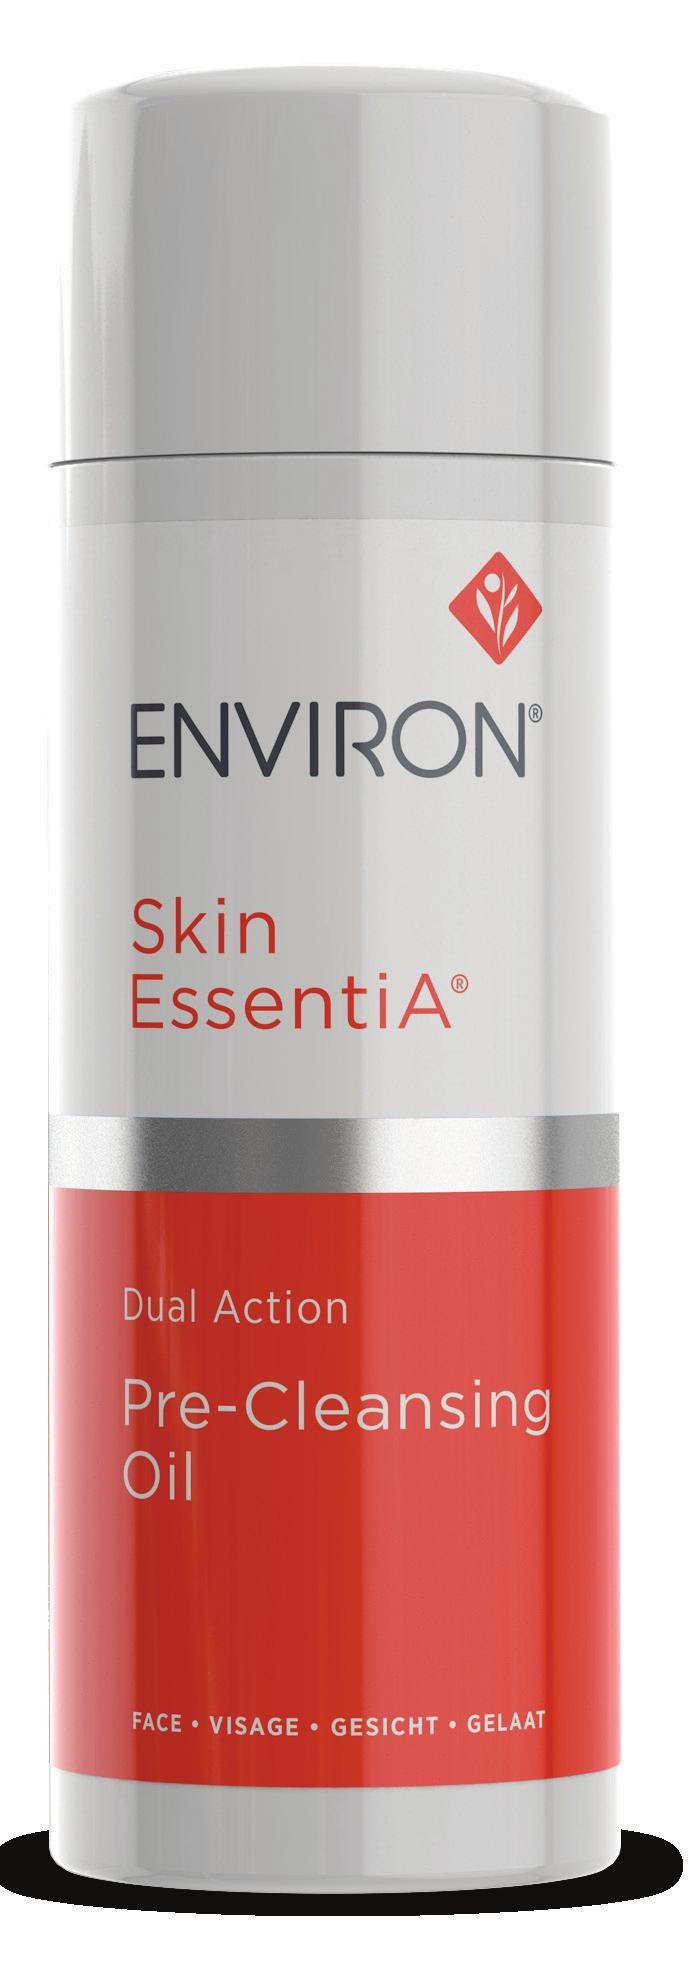 Dual Action Pre-Cleansing Oil This pre-cleansing oil helps to effectively lift and remove excess surface oil, sunscreen and all types of make-up from the skin s surface and is the perfect first step